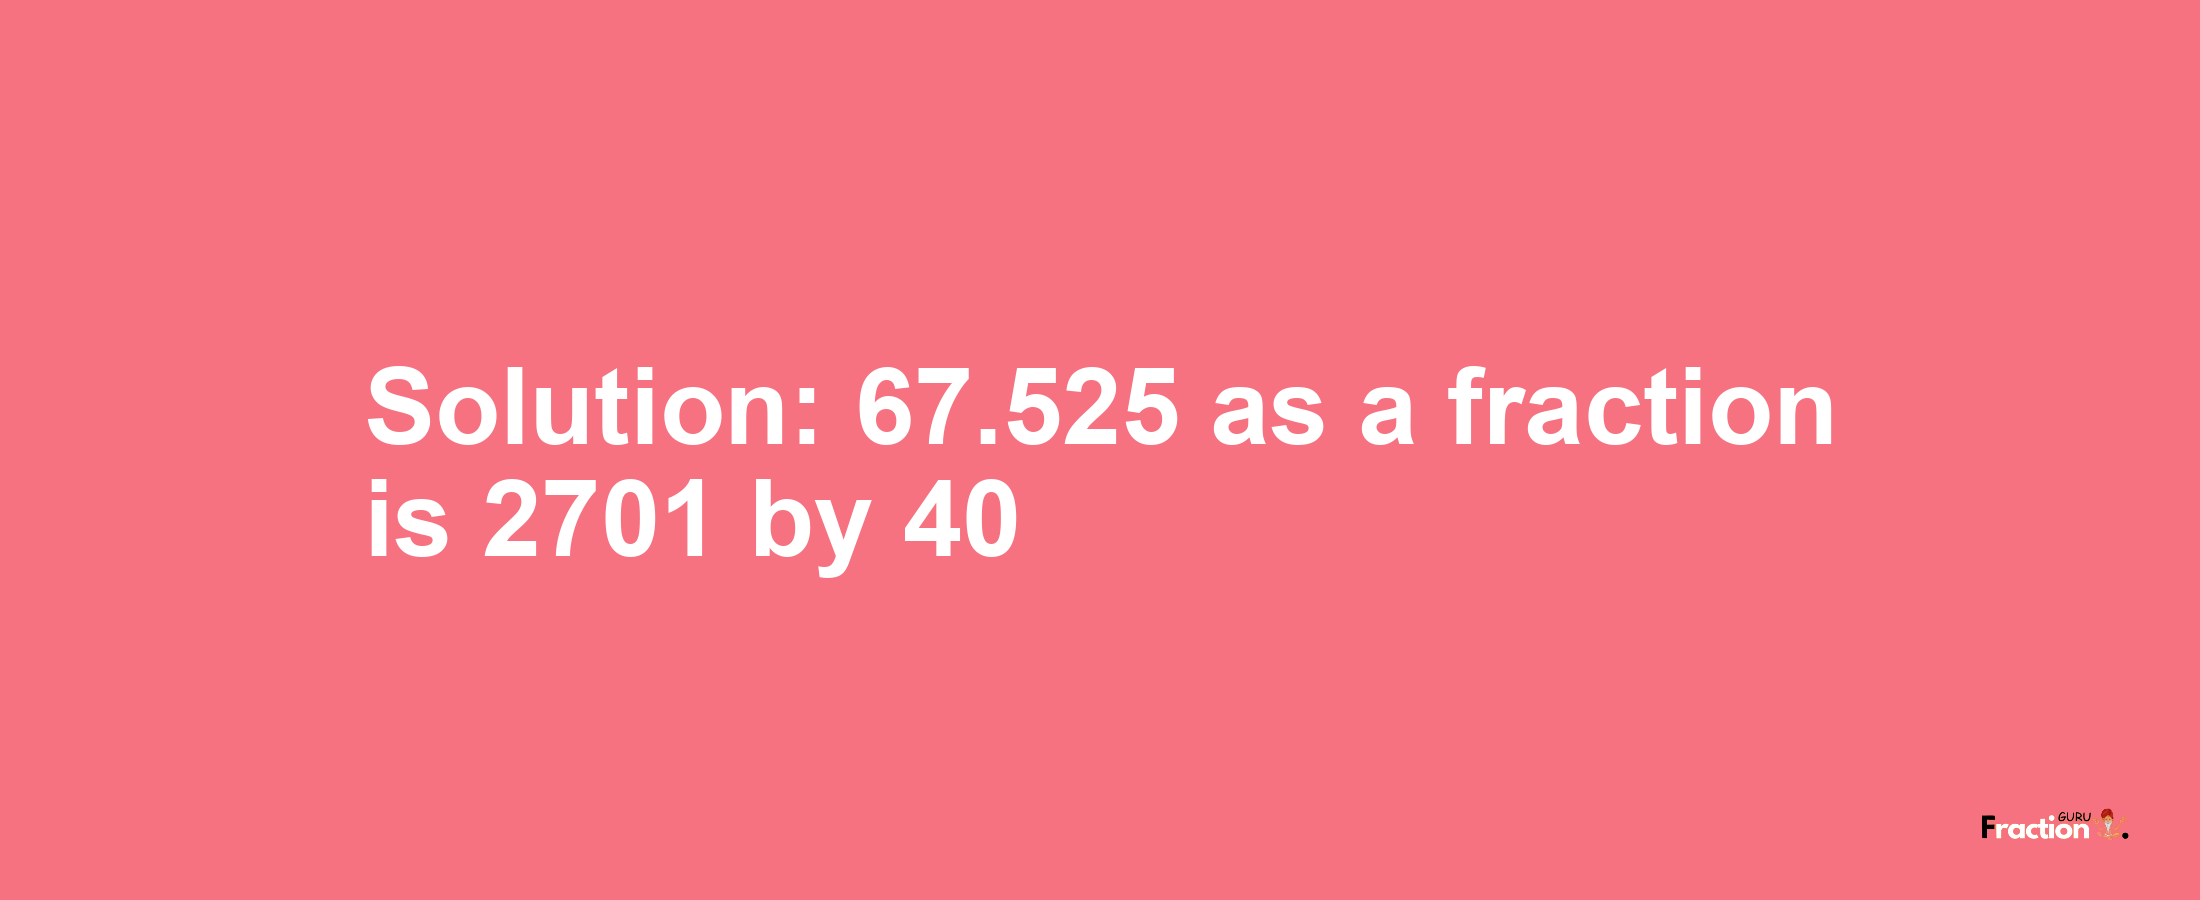 Solution:67.525 as a fraction is 2701/40